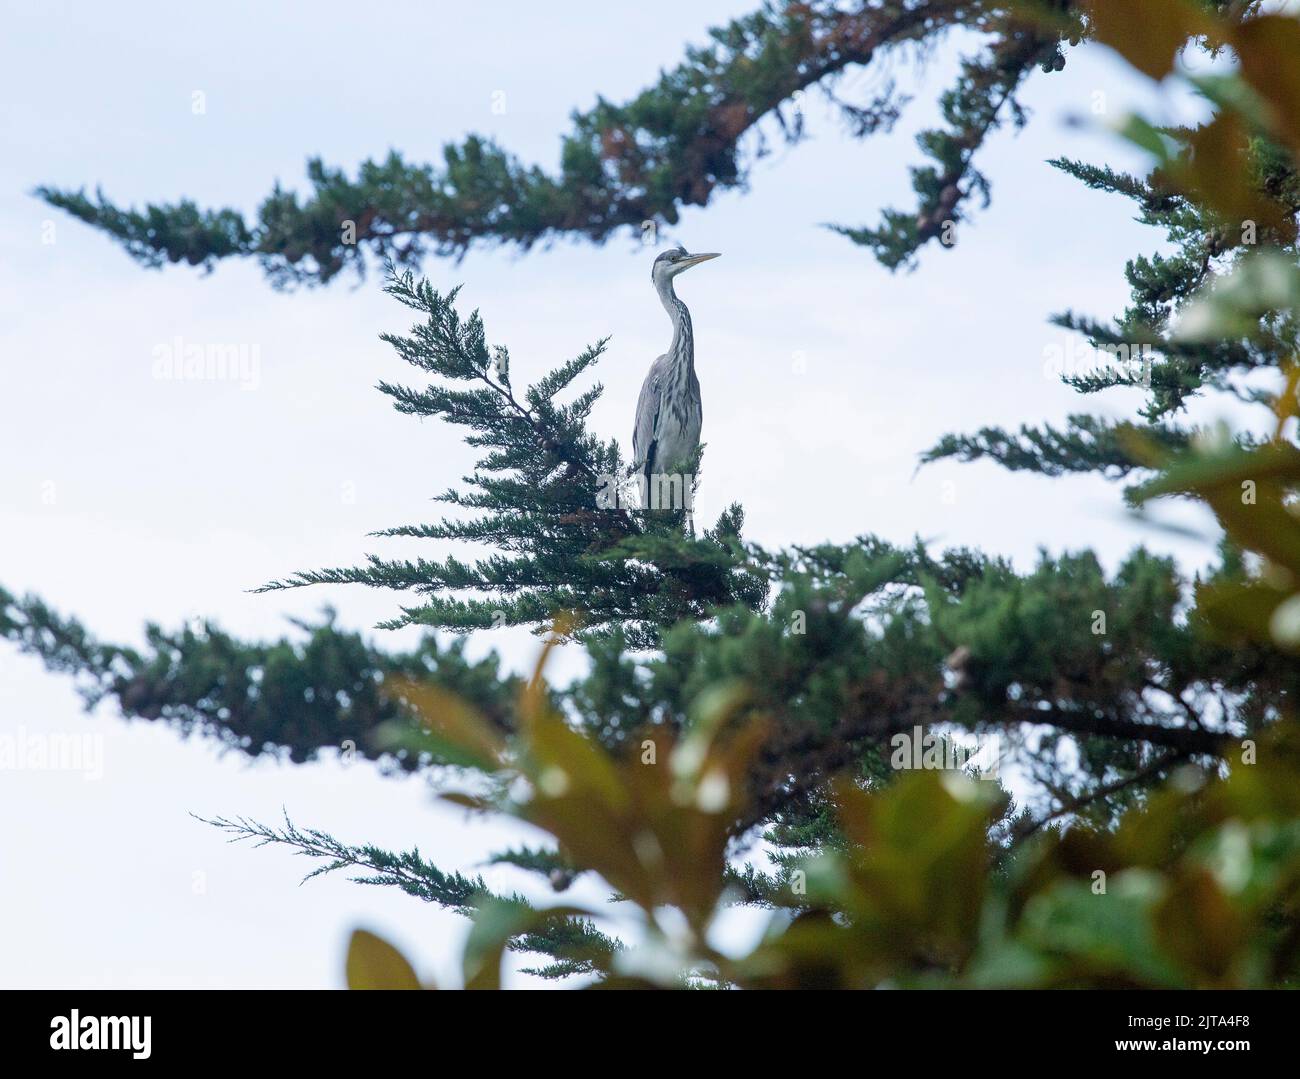 Sidmouth, Devon, 29th Aug 2022 A grey heron sits in a Monterey Cyprus tree high above a garden pond in Devon. Shortage of rain has left river levels at an all-time low, forcing herons and other predatory birds to look for their fish supper in gardens. Tony Charnock/Alamy Live News Stock Photo